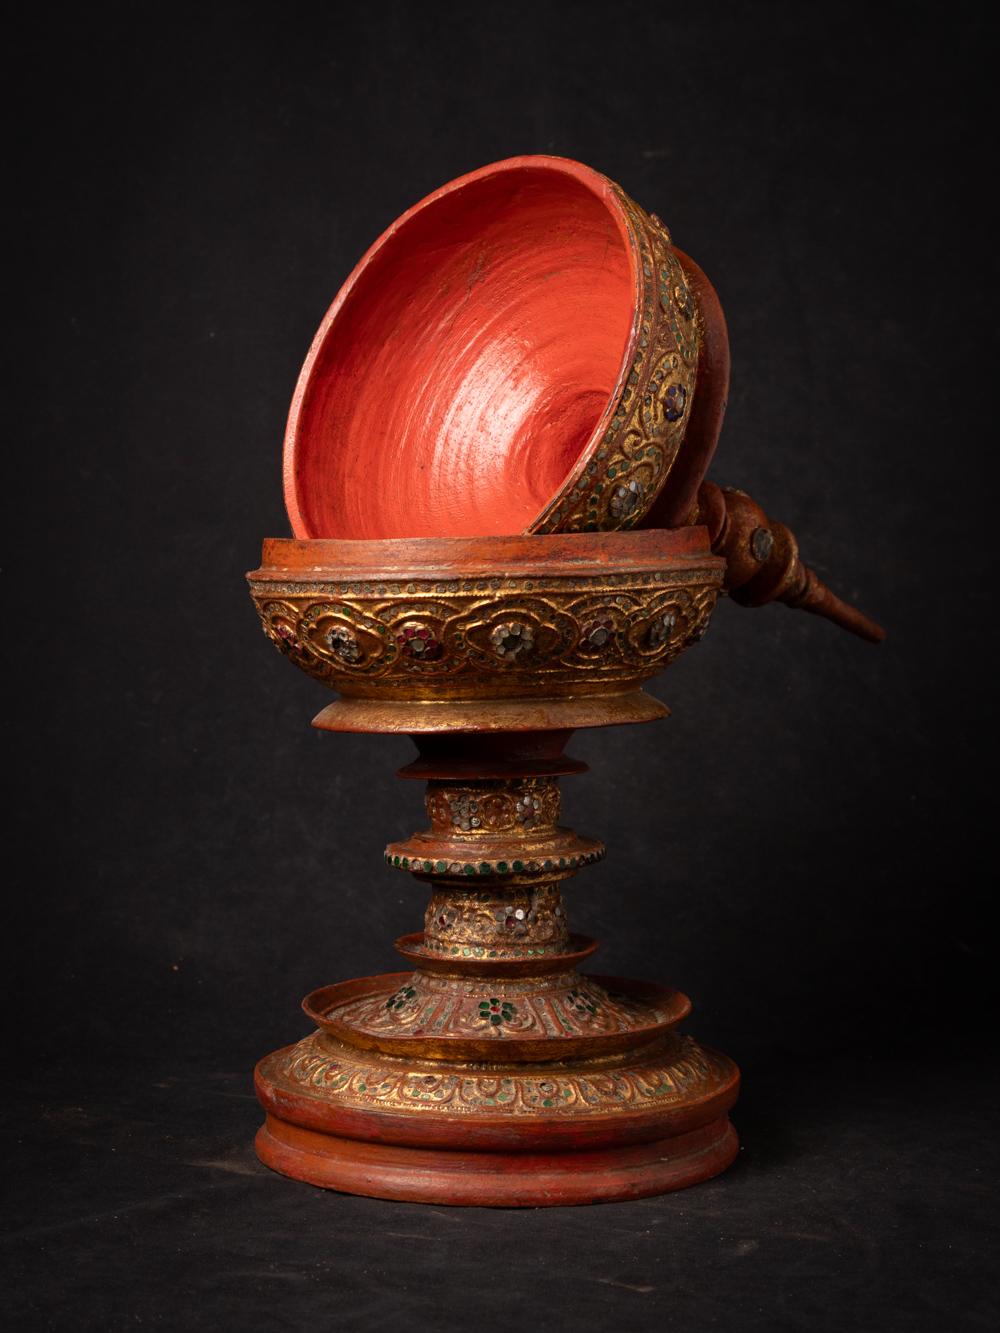 Antique wooden Burmese offering vessel
Material : wood
57,5 cm high
20,8 cm diameter
Gilded with 24 krt. gold
Mandalay style
19th century
Weight: 1,31 kgs
Originating from Burma
Nr: 3664-23